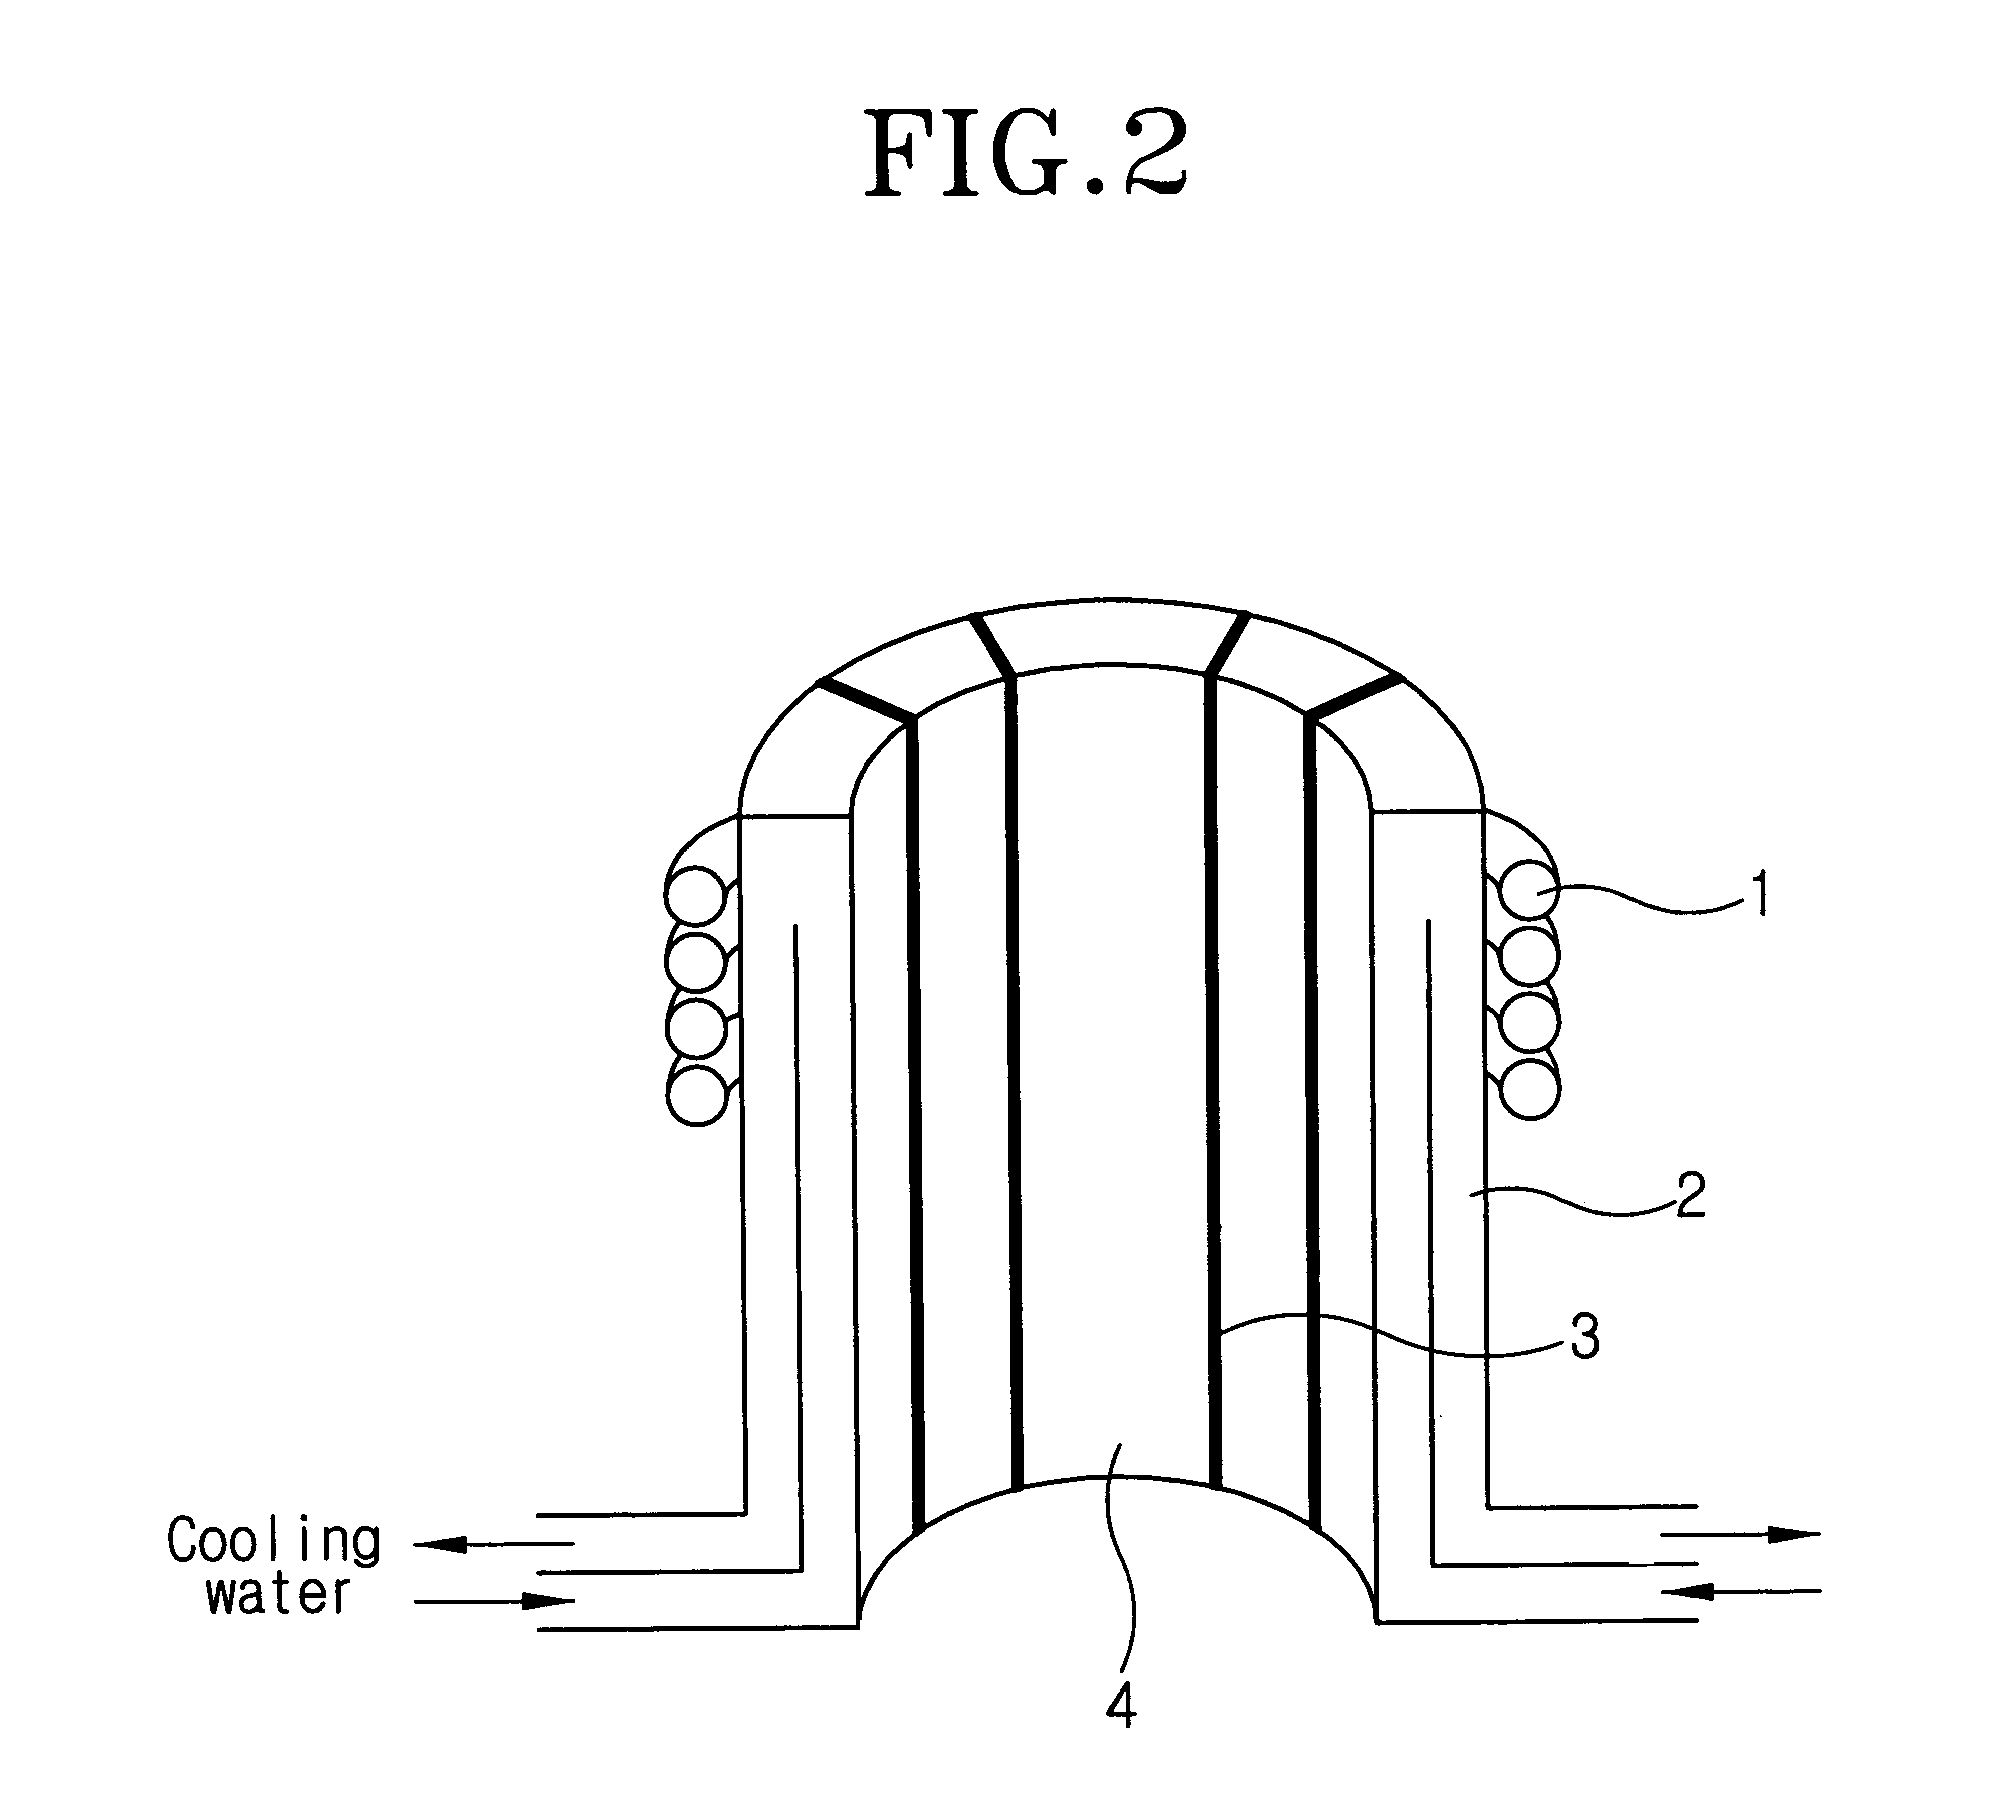 Electromagnetic continuous casting apparatus for materials possessing high melting temperature and low electric conductance